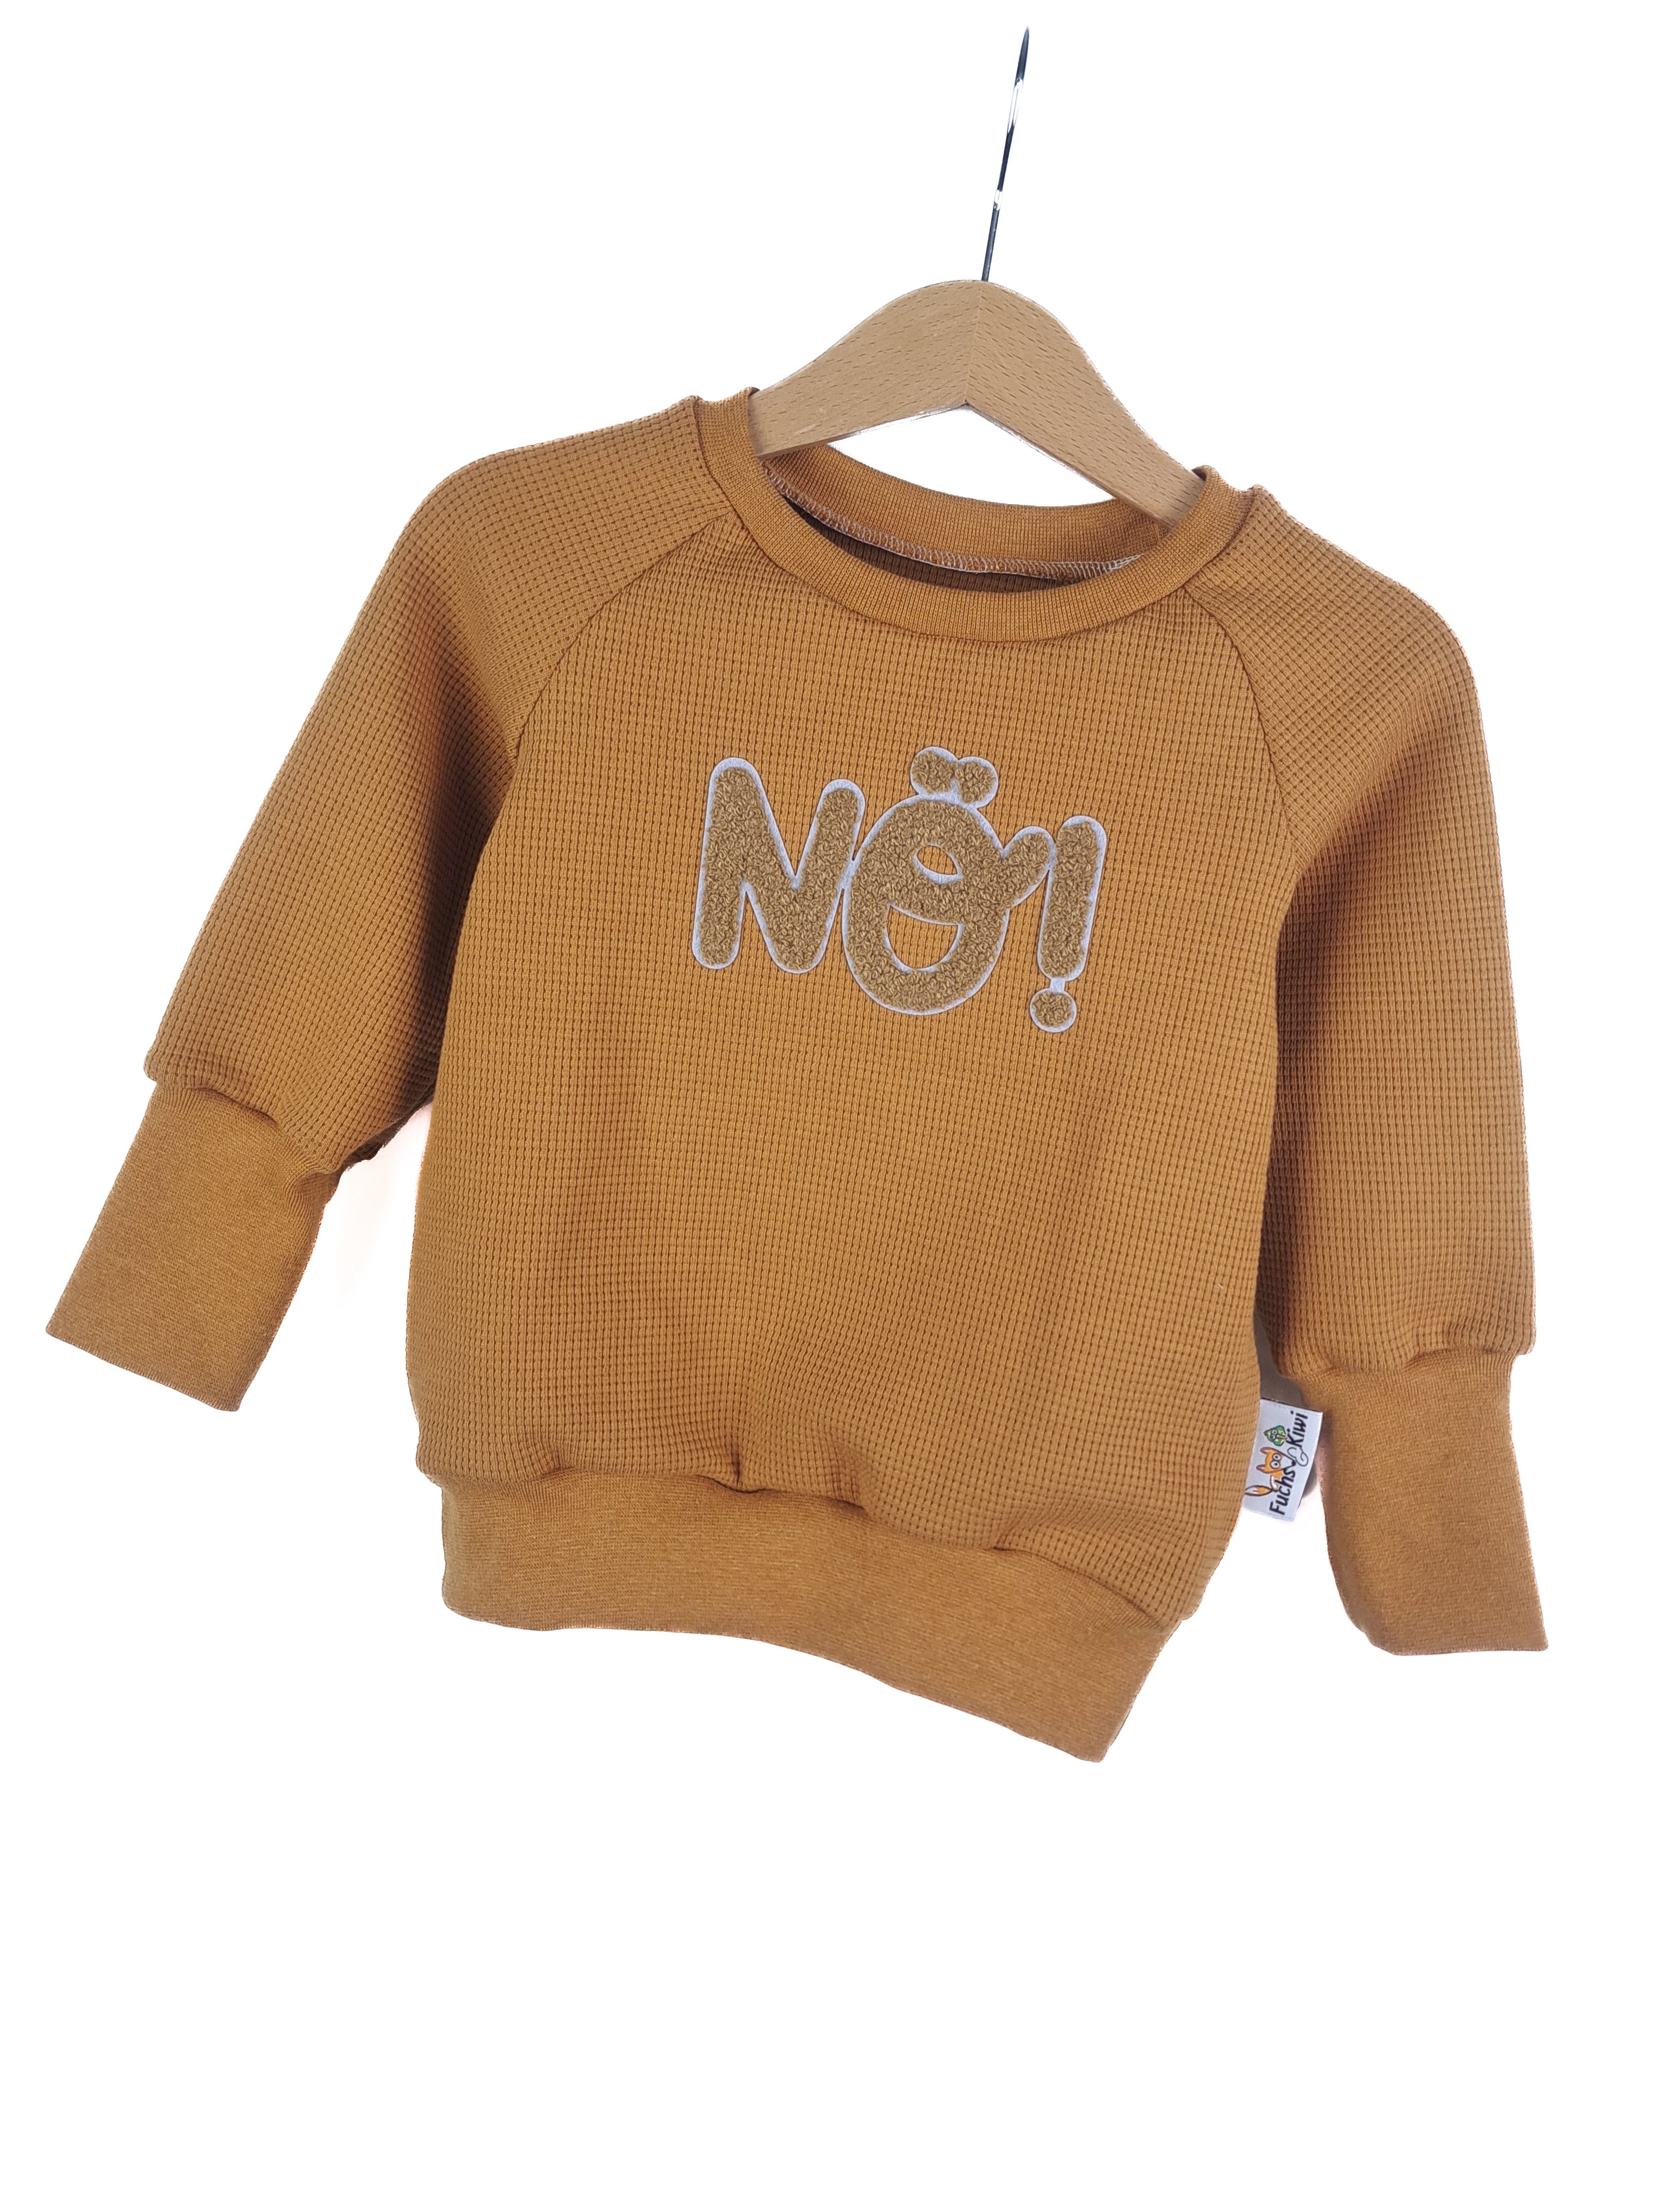 Pullover Nö Patch taupe/curry